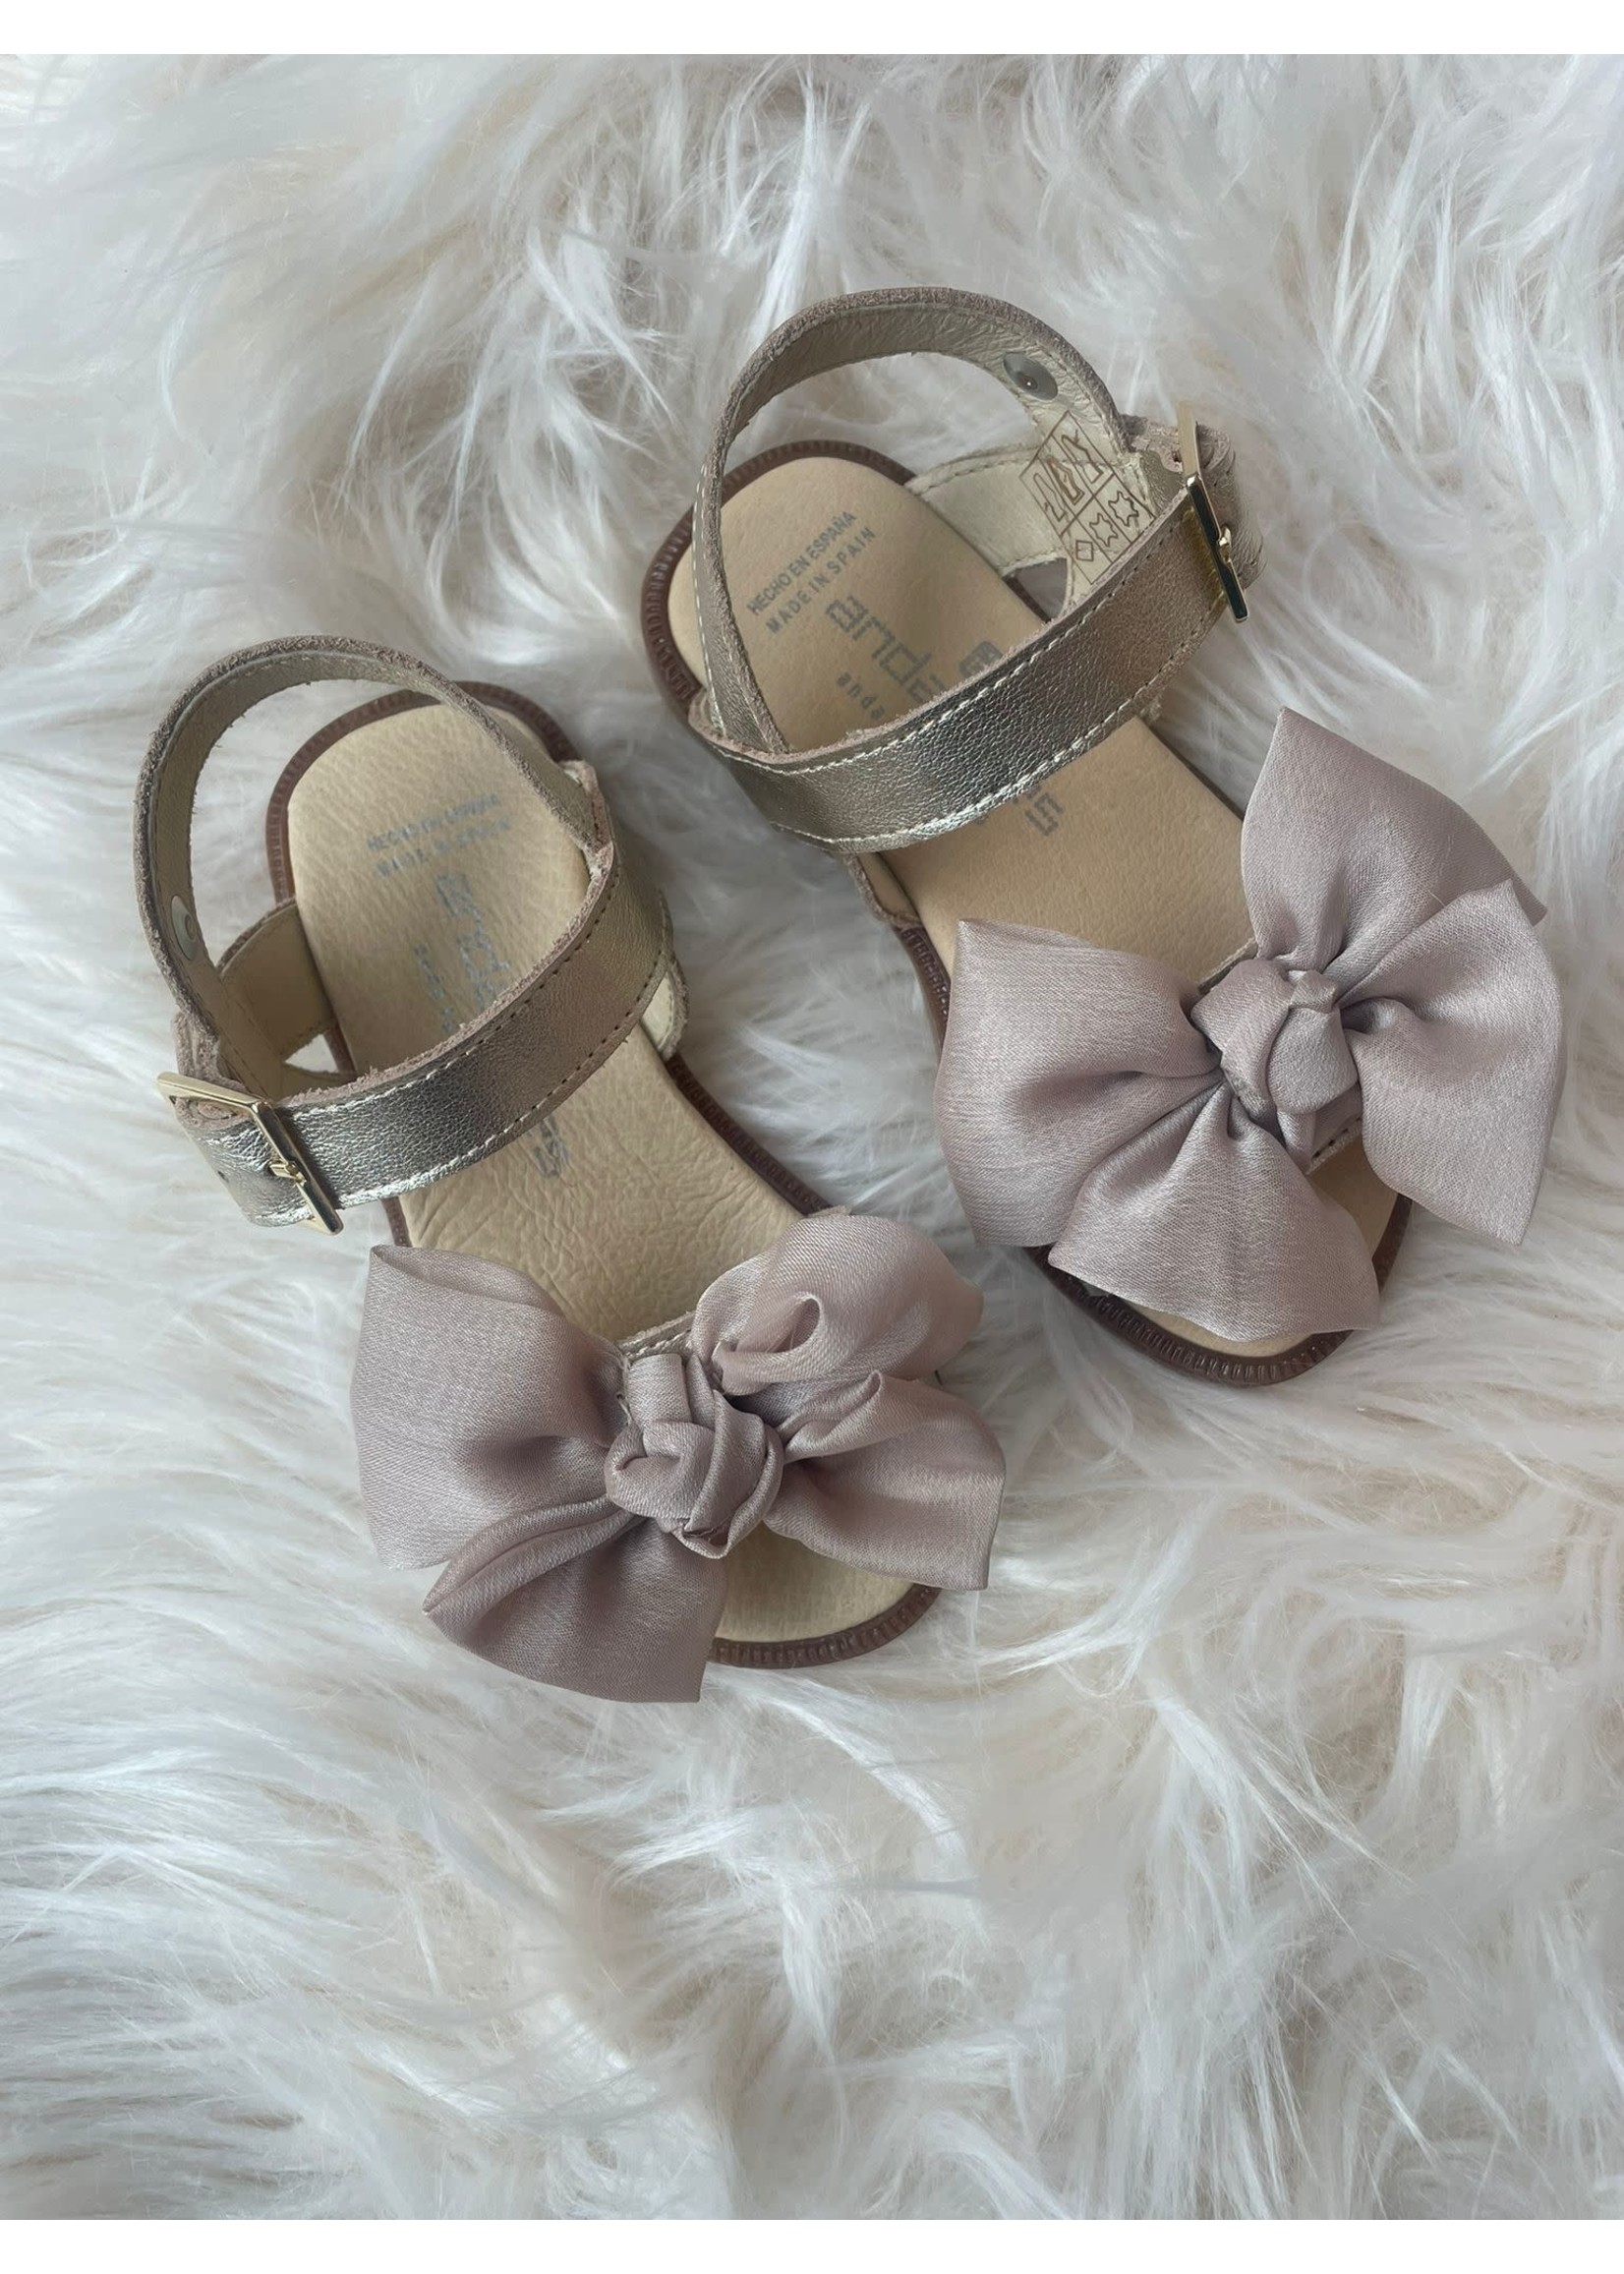 Andanines Golden Sandals Bow